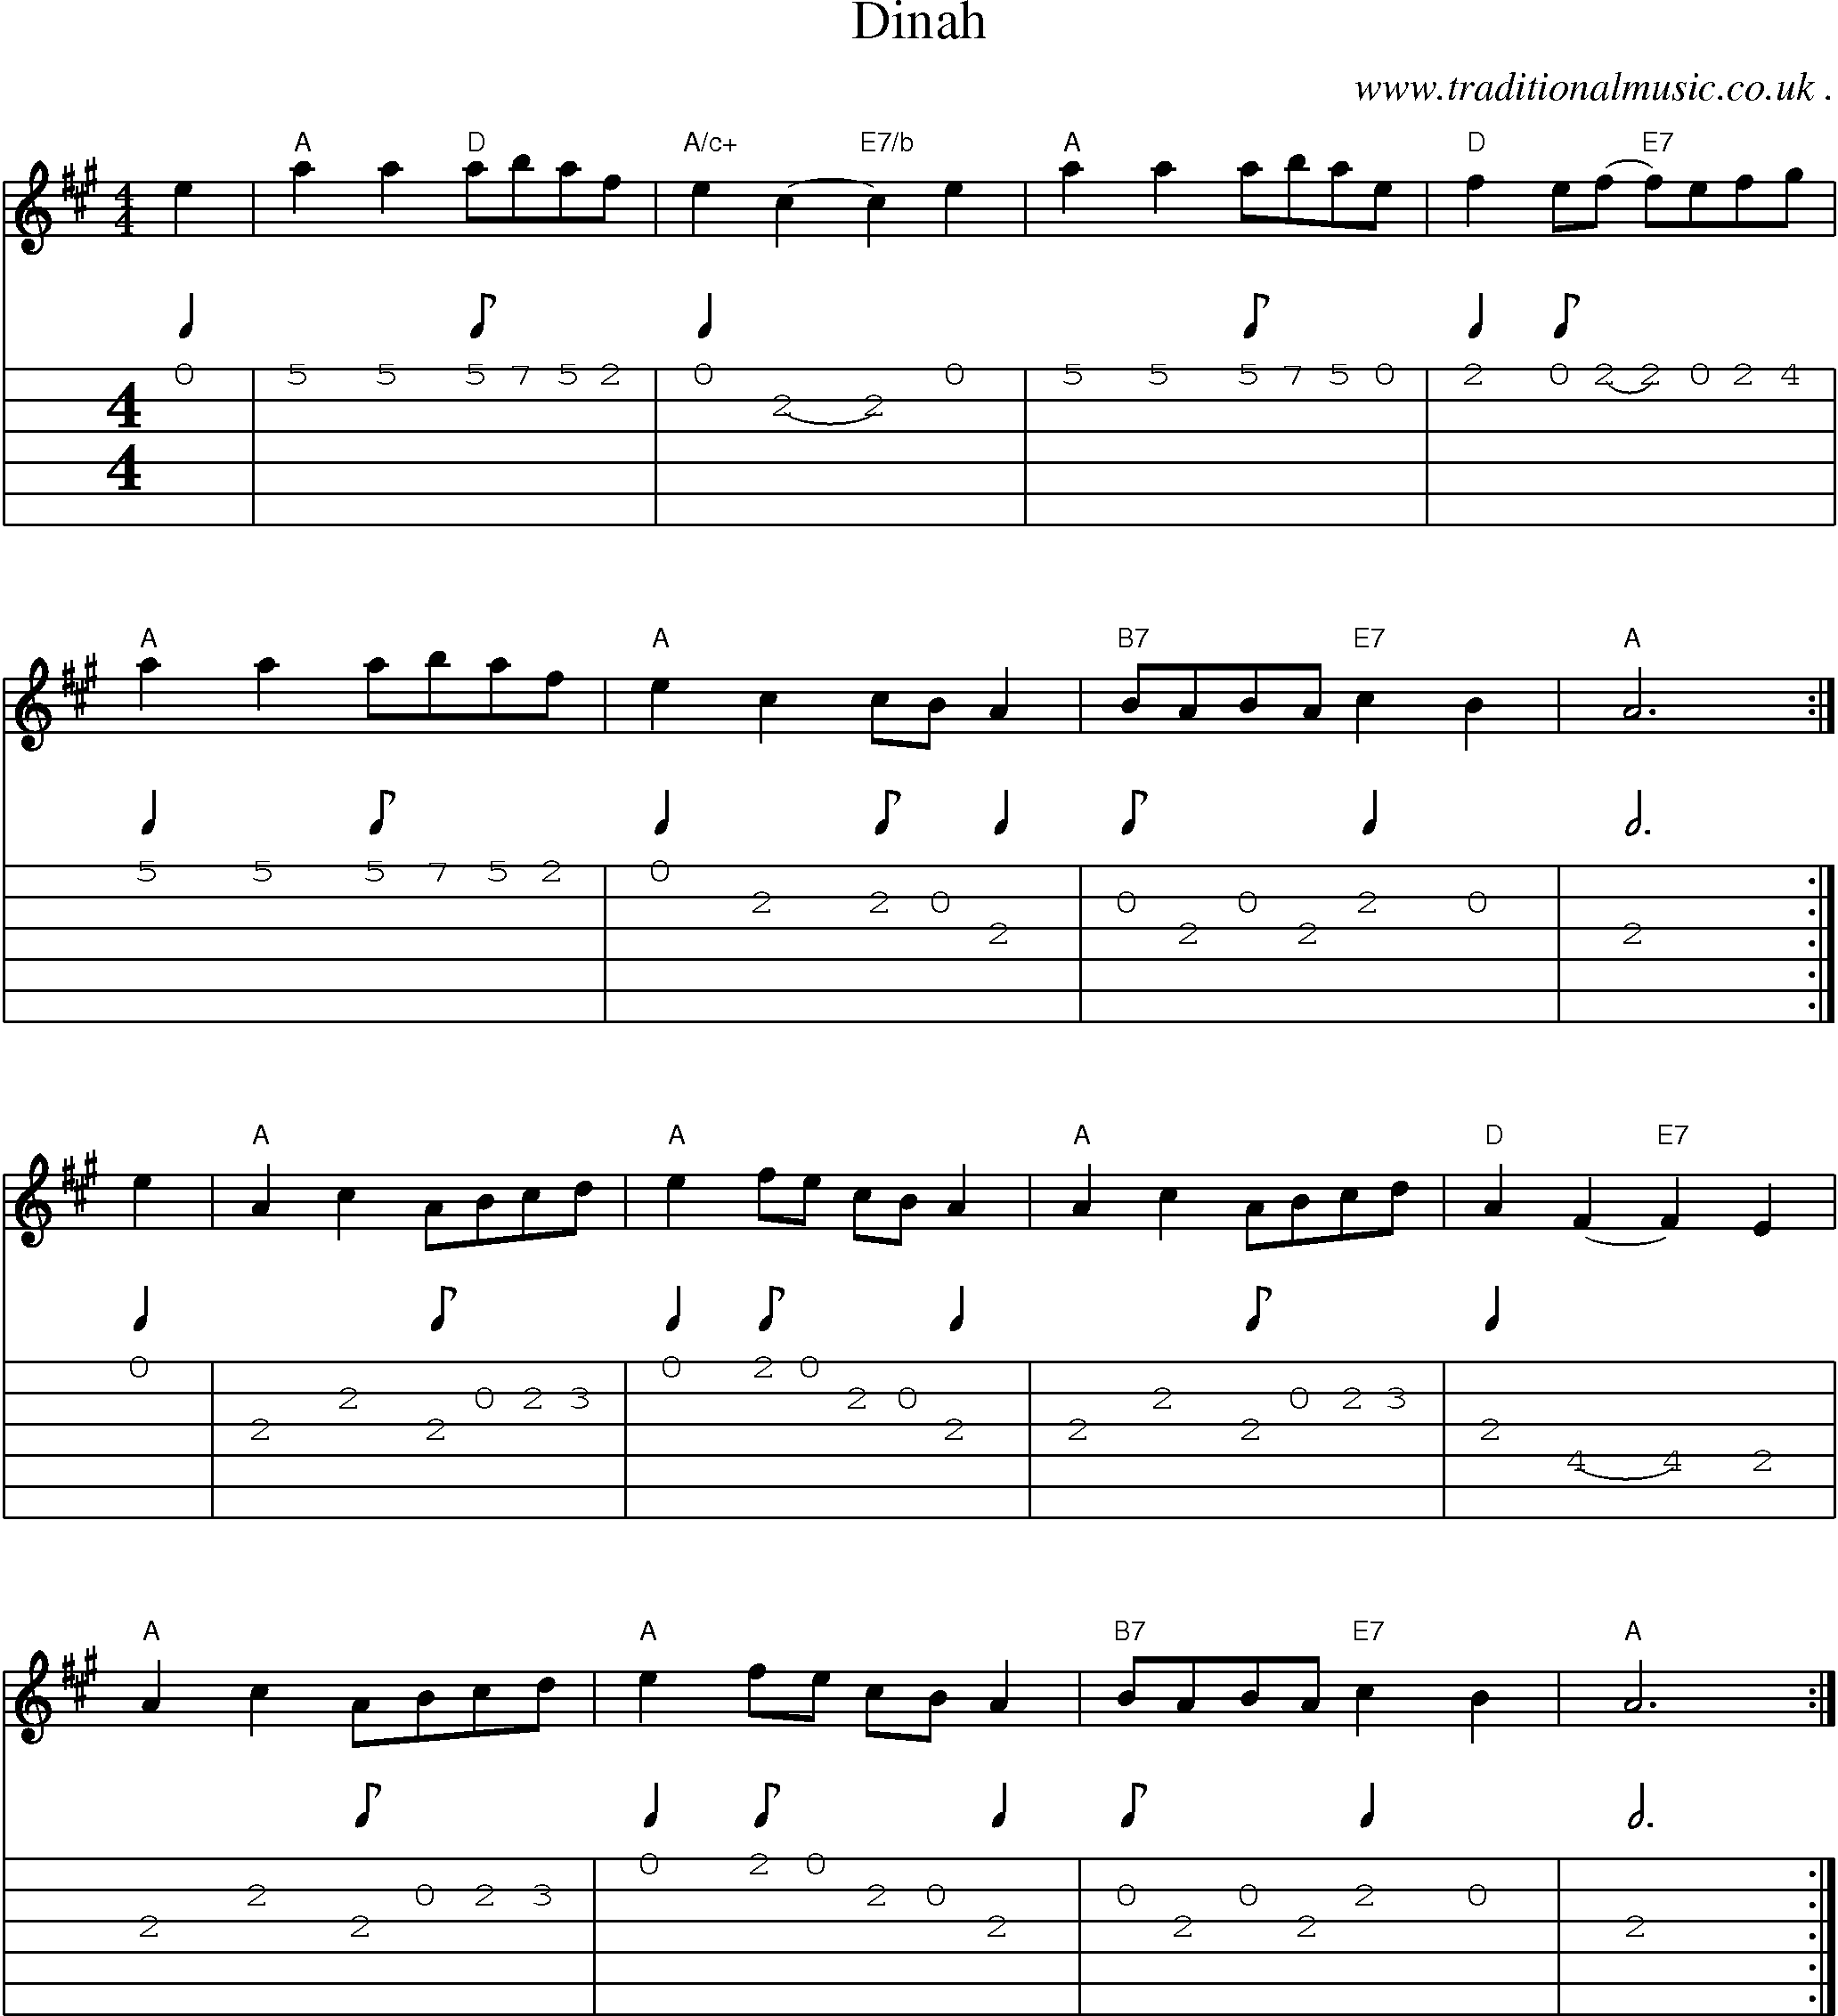 Music Score and Guitar Tabs for Dinah